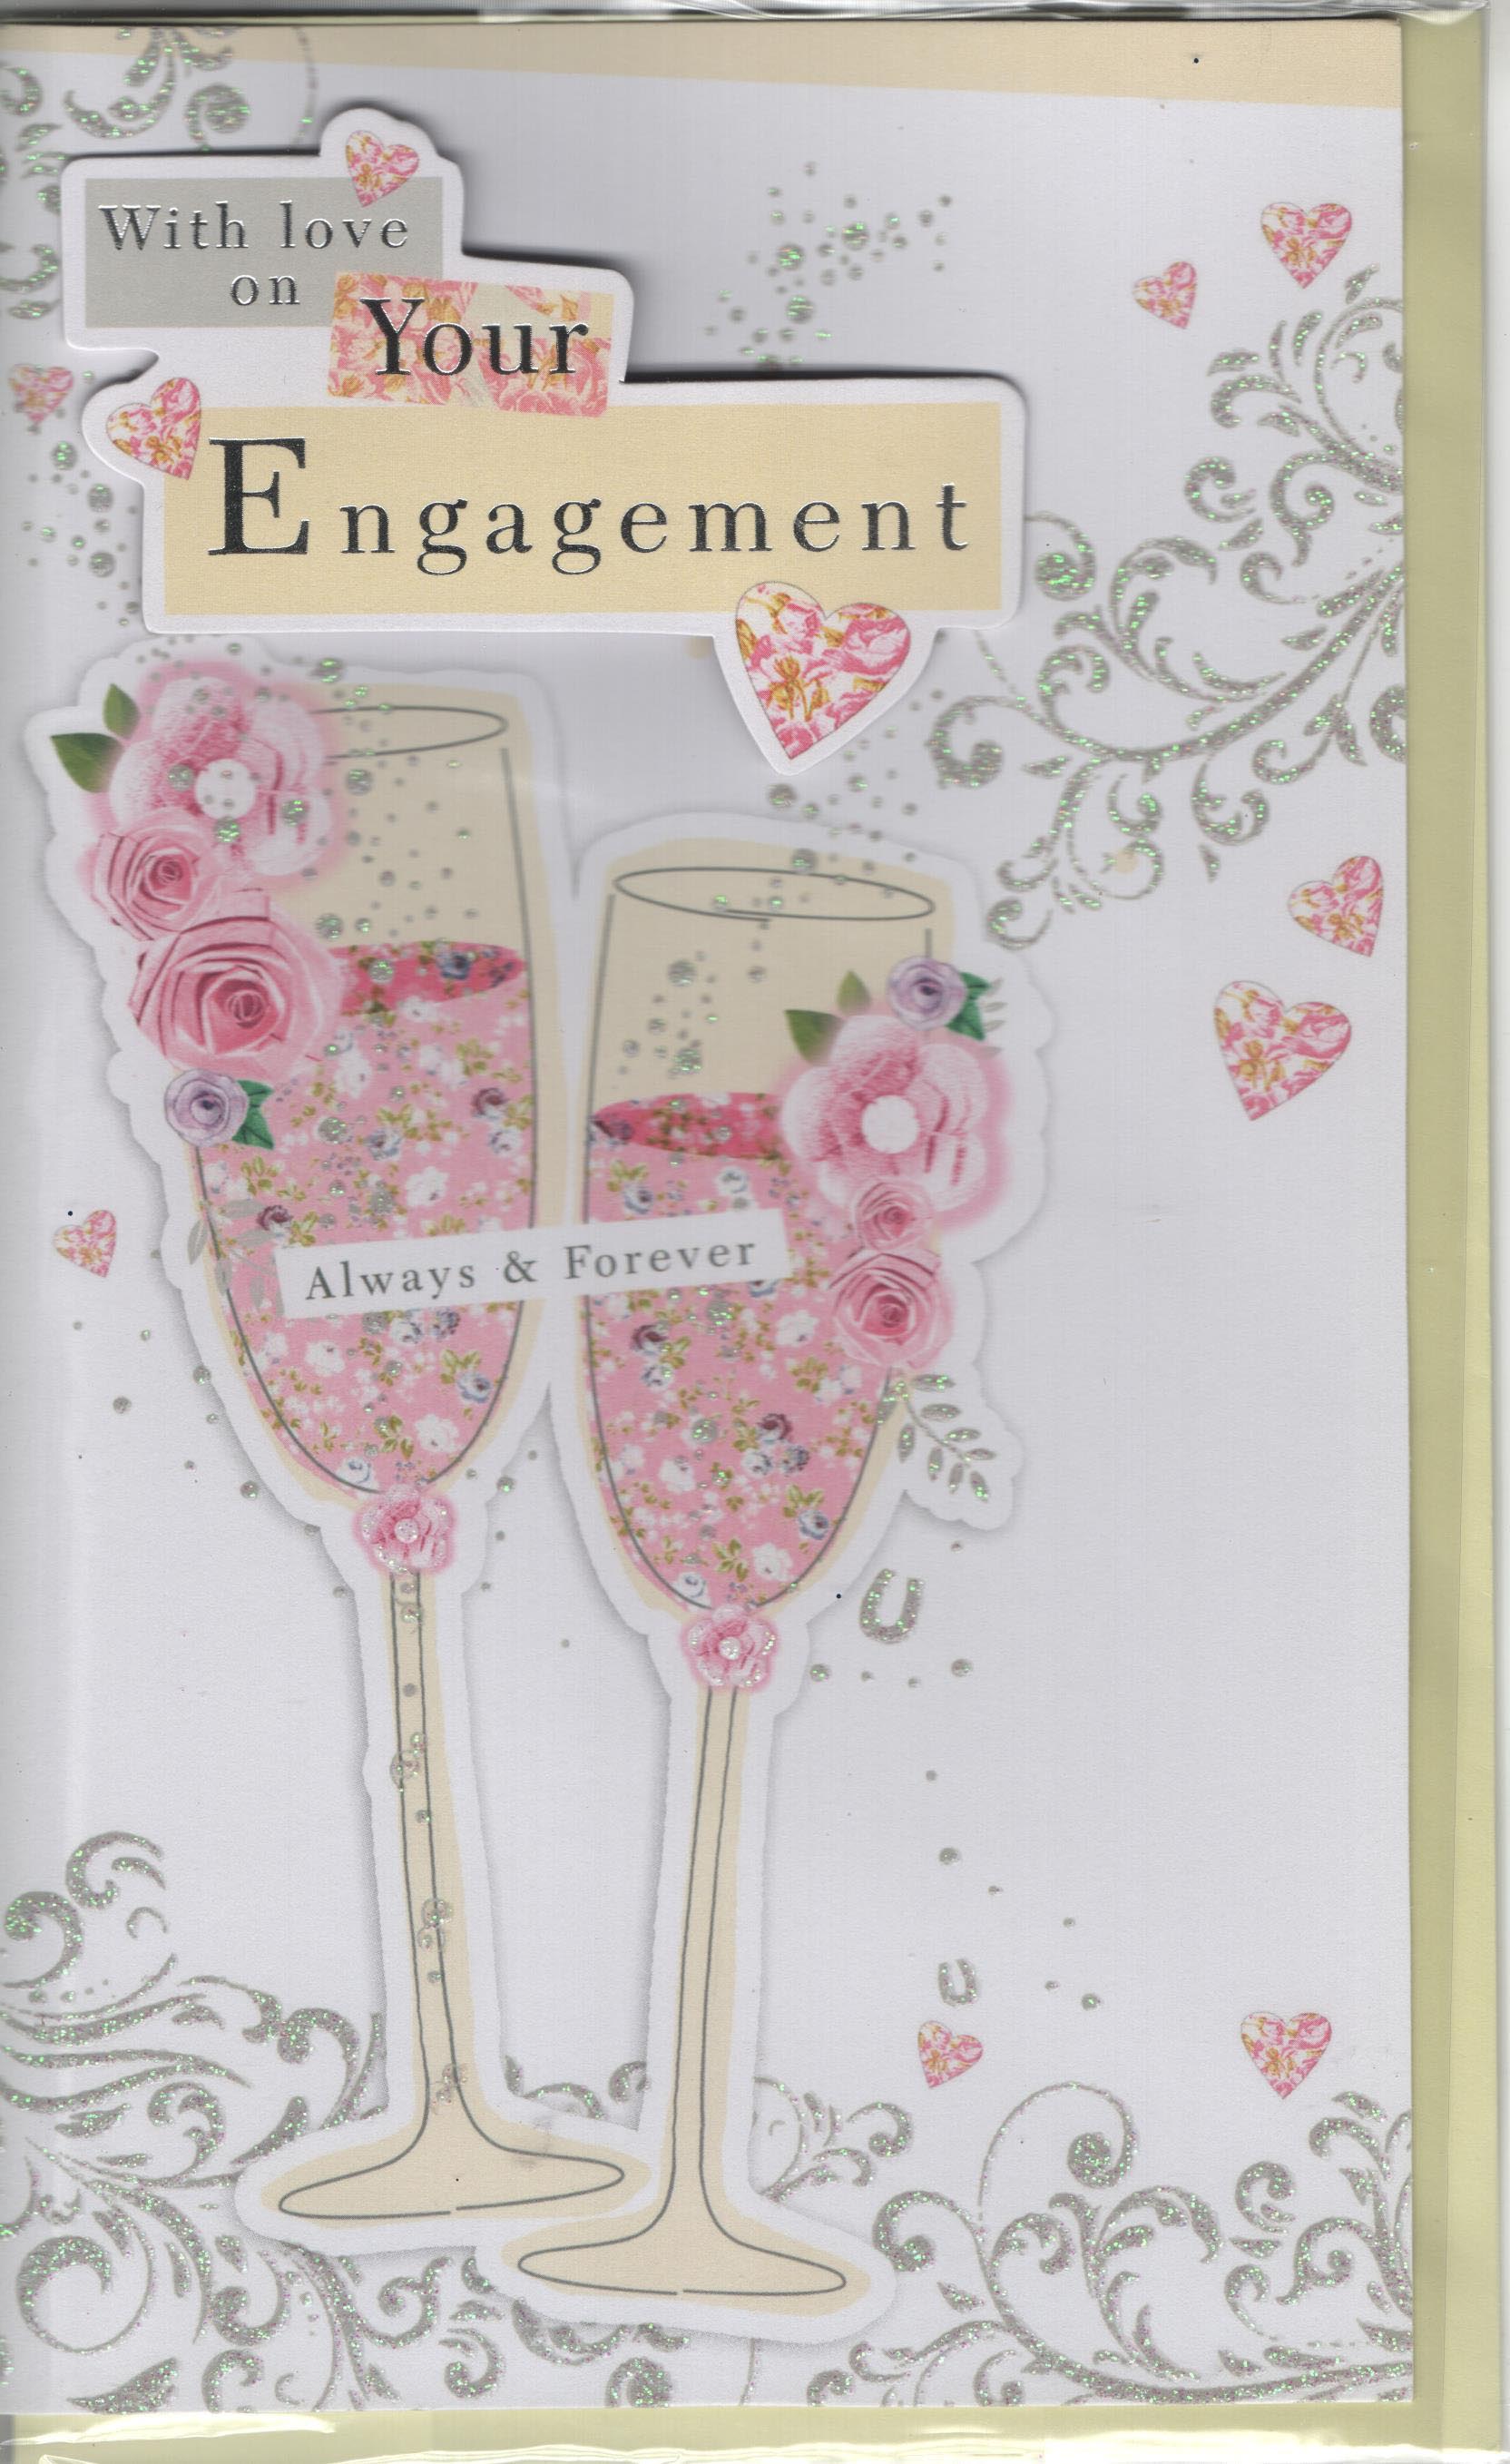 With Love on Your Engagement 